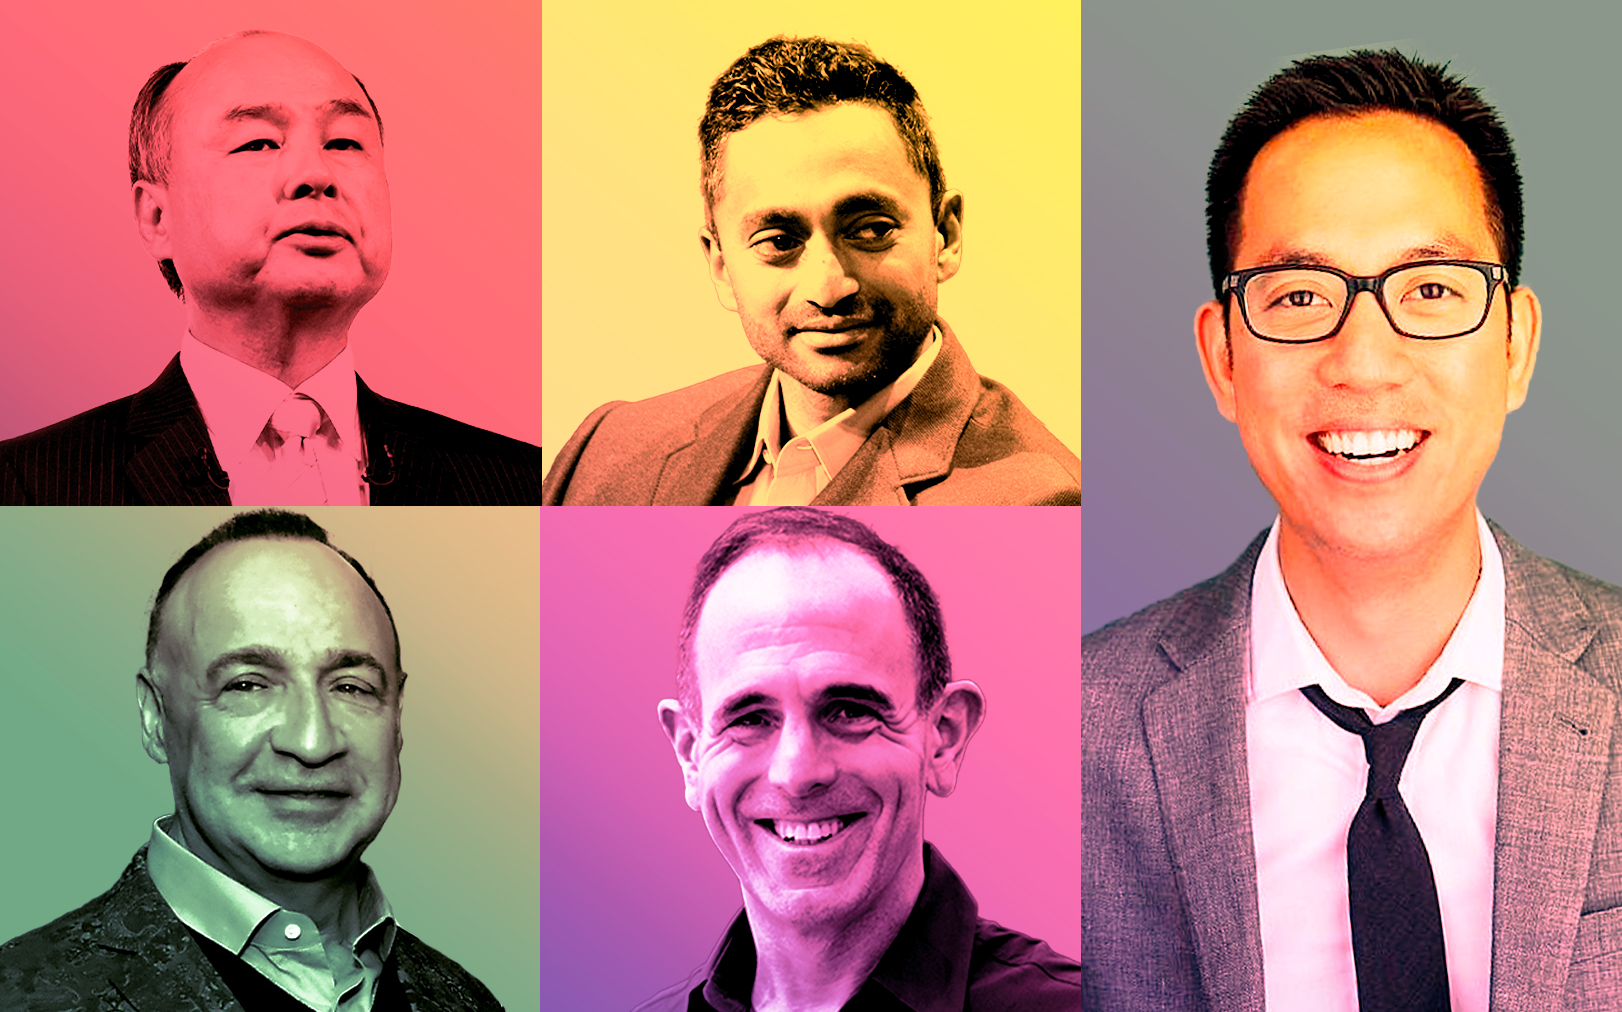 Clockwise from left: Softbank CEO Masayoshi Son, Social Capital CEO Chamath Palihapitiya, Opendoor CEO Eric Wu, Founders Fund partner Keith Rabois and Access Industries chairman Len Blavatnik (Getty; Opendoor; Founders Fund)